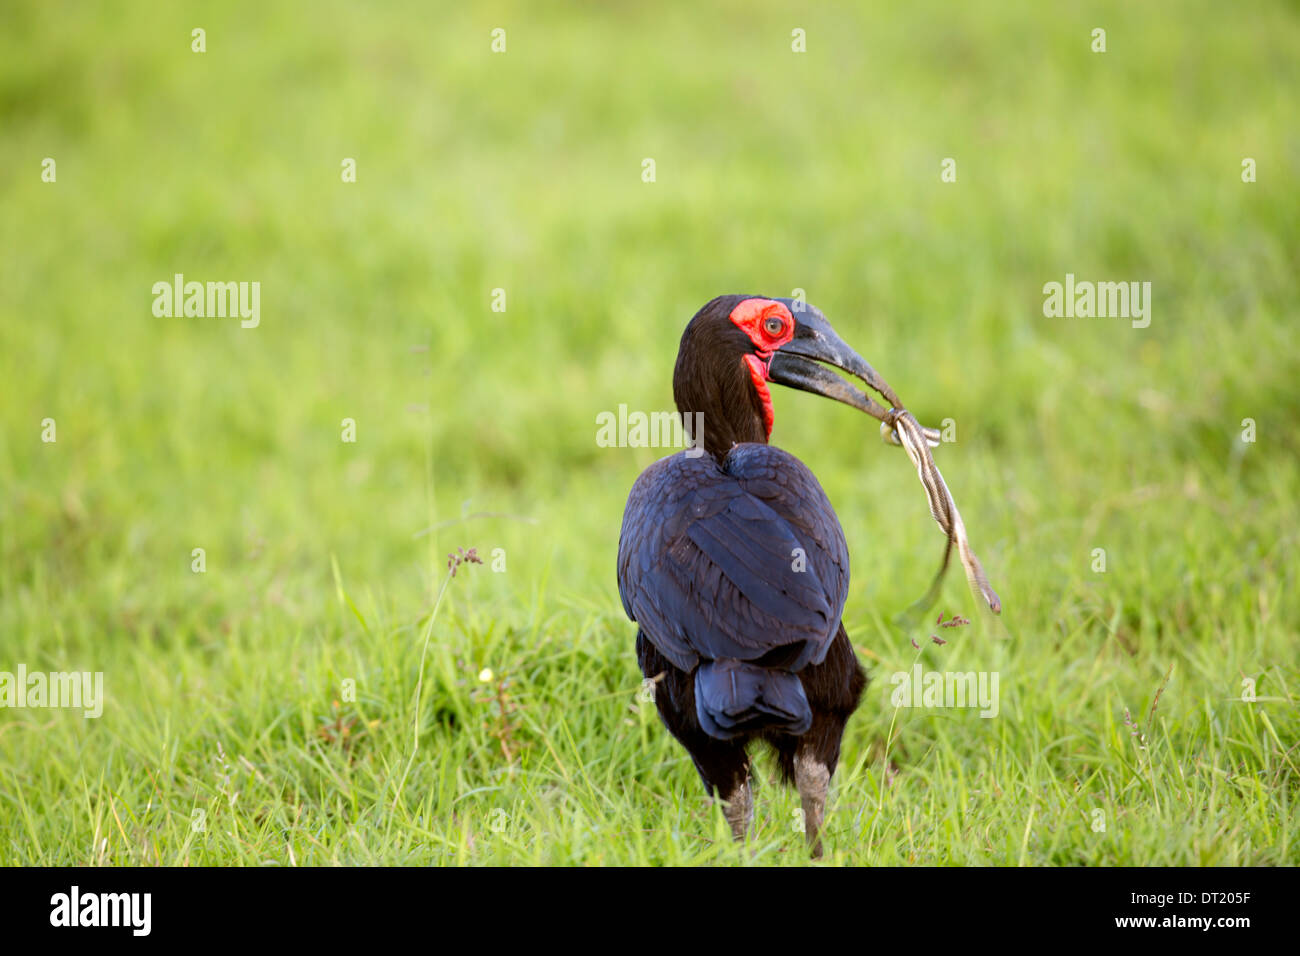 The Southern Ground Hornbill ( Bucorvus leadbeateri ) also known as Bucorvus cafer with snake coiled in its beak Stock Photo